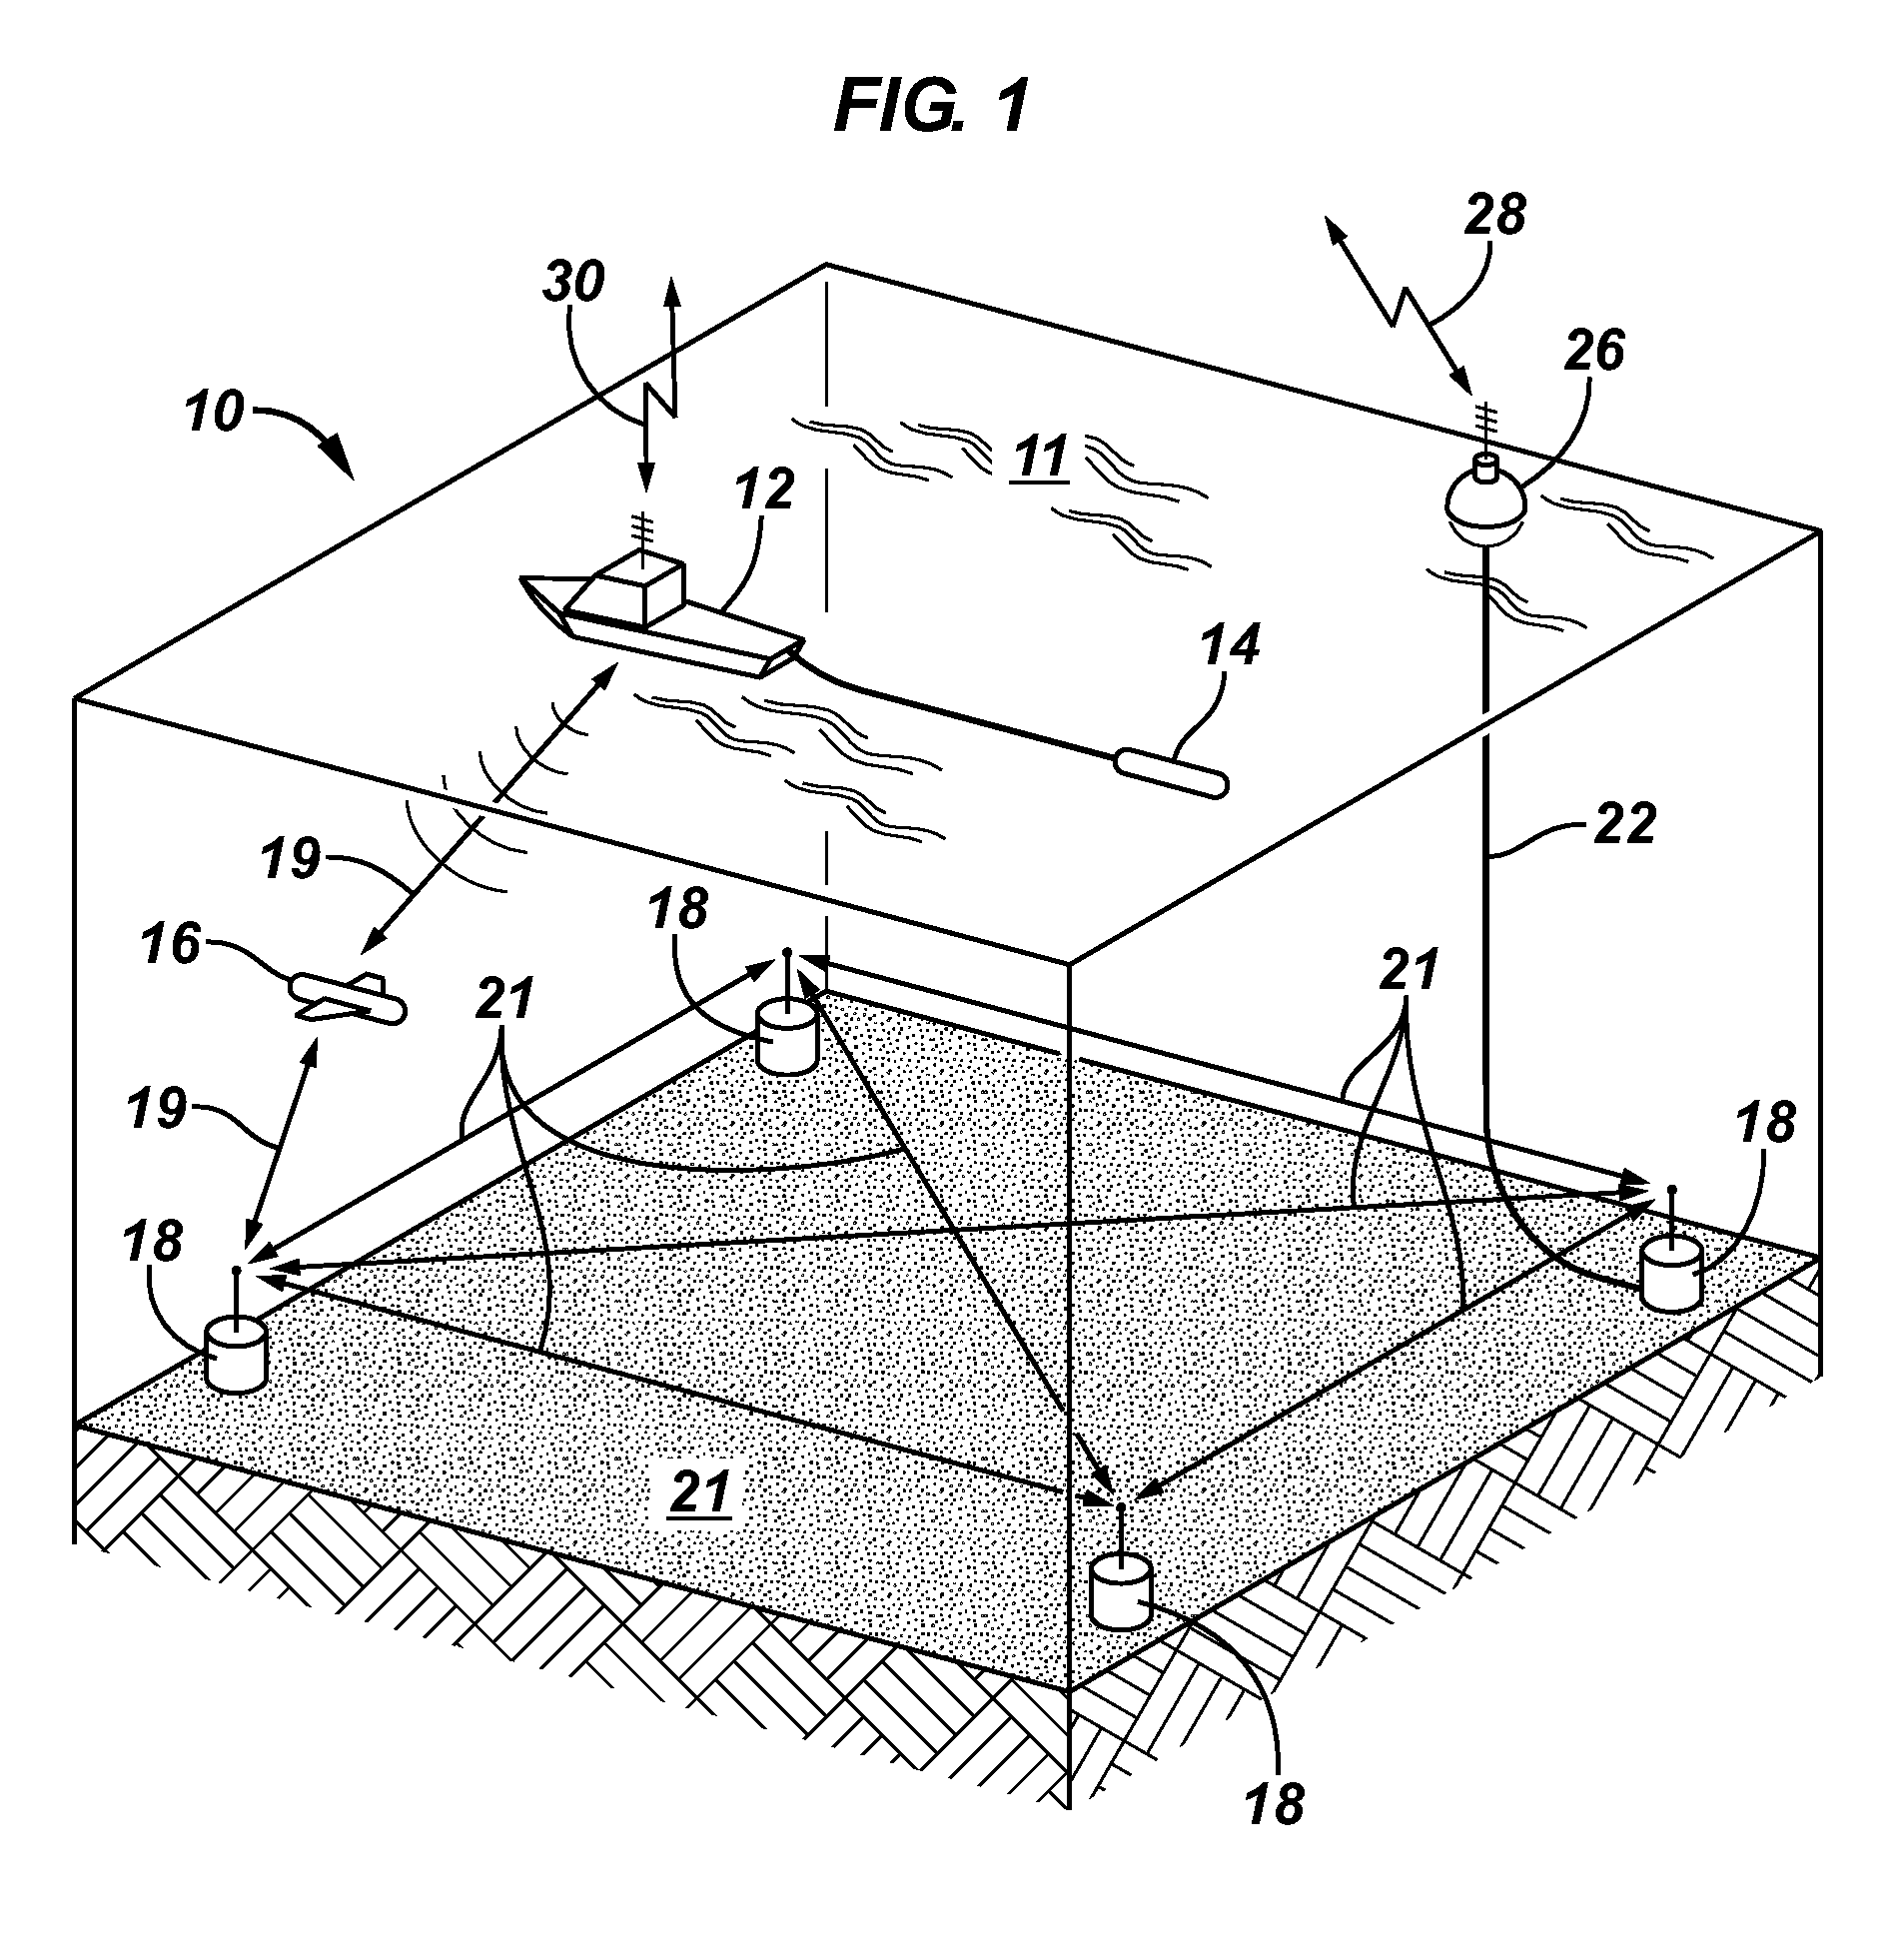 Apparatus, systems and methods for seabed data acquisition